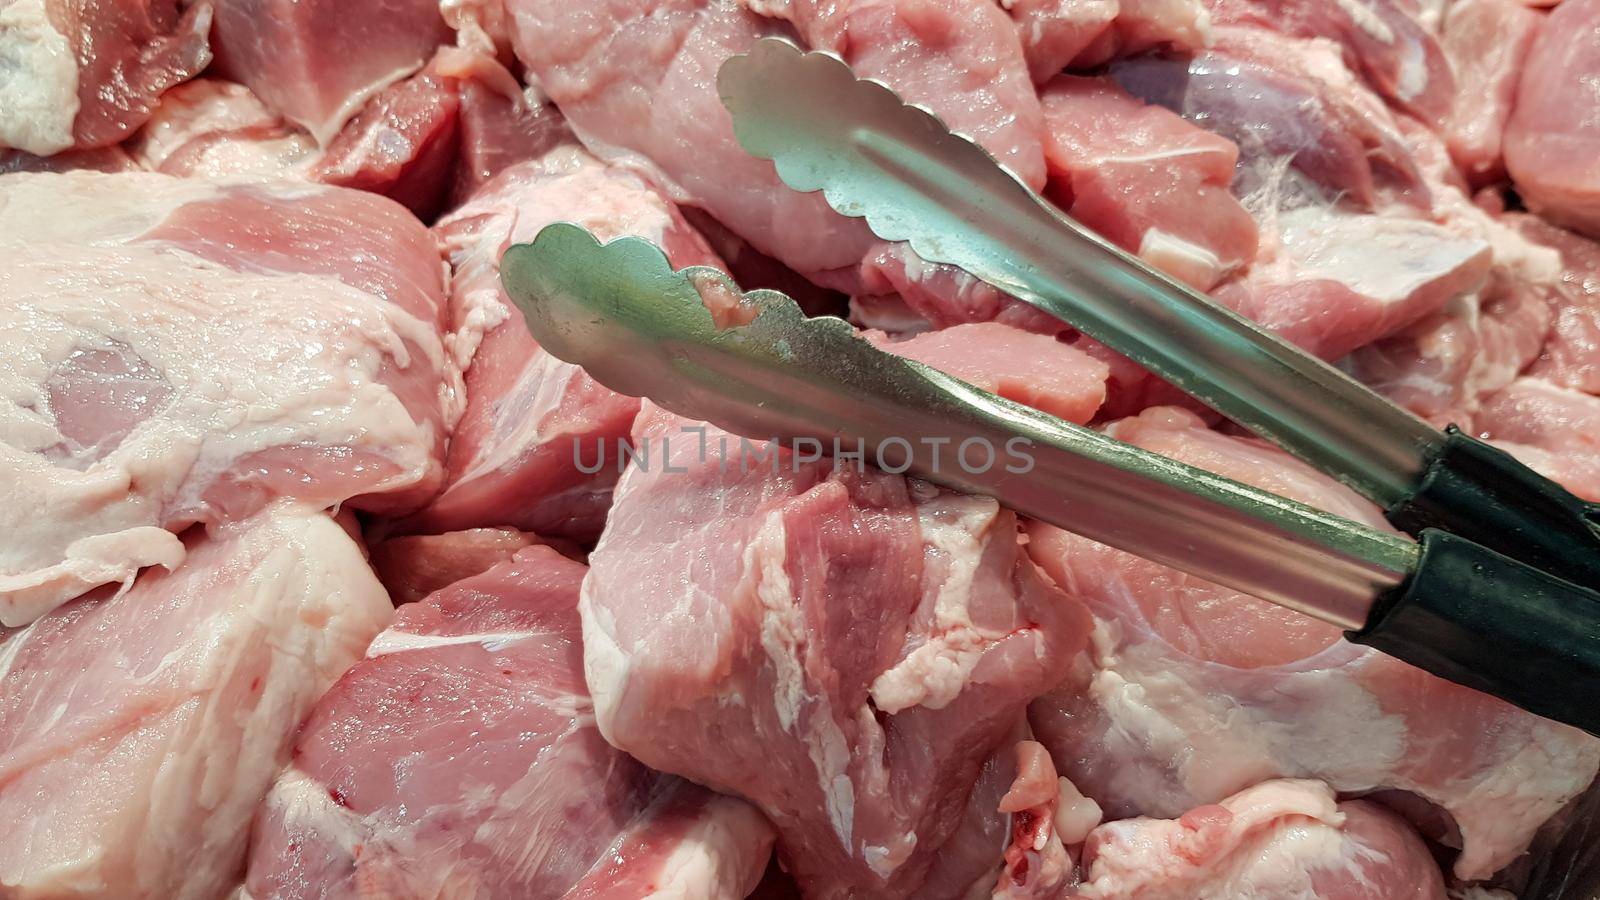 Pork is sold in a tray with steel tongs with a black handle.